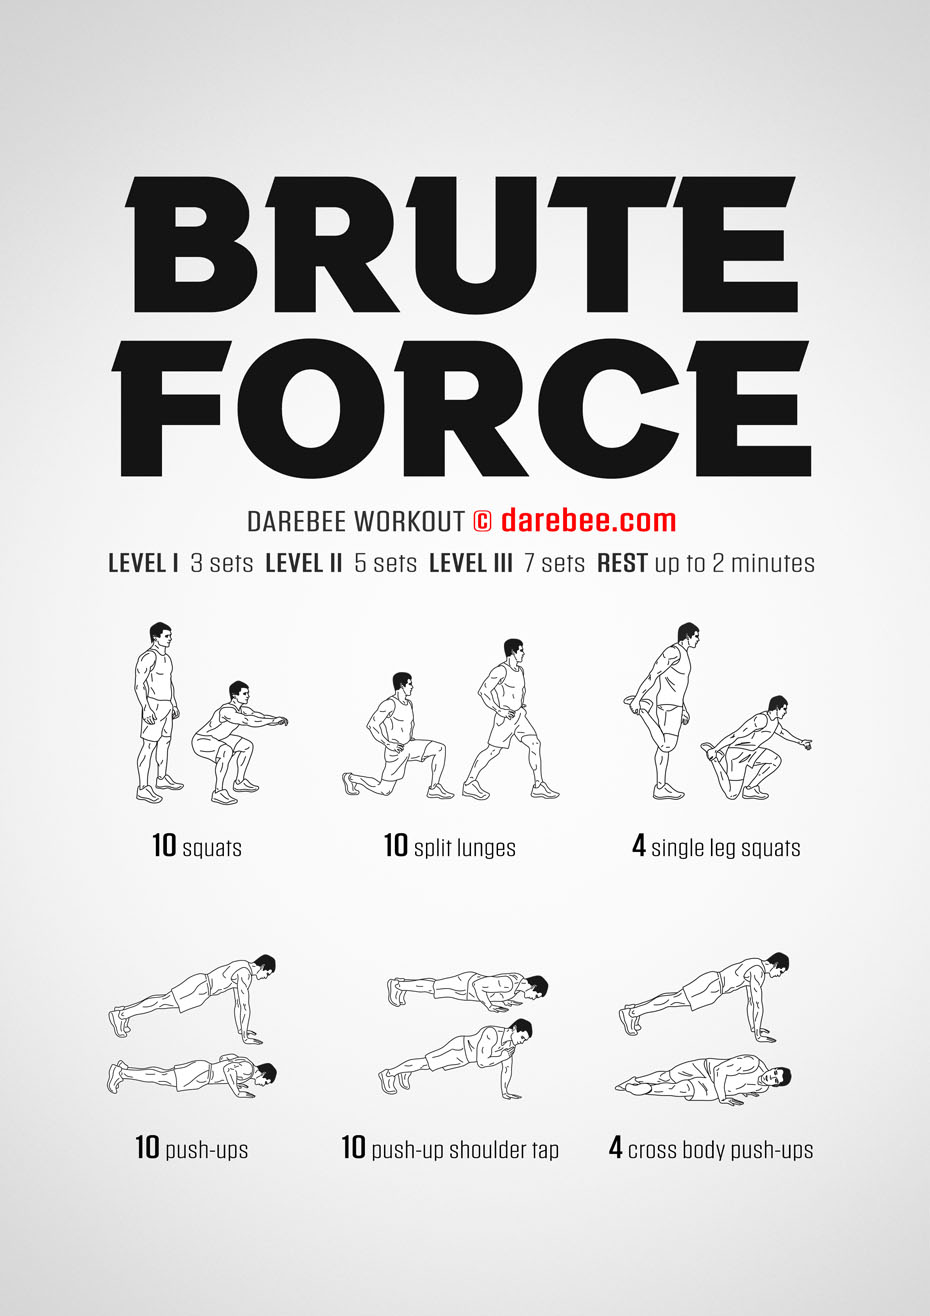 Brute Force is a Darebee home-fitness workout uses your body's weight and the planet's gravity to make your muscles work hard for strength.